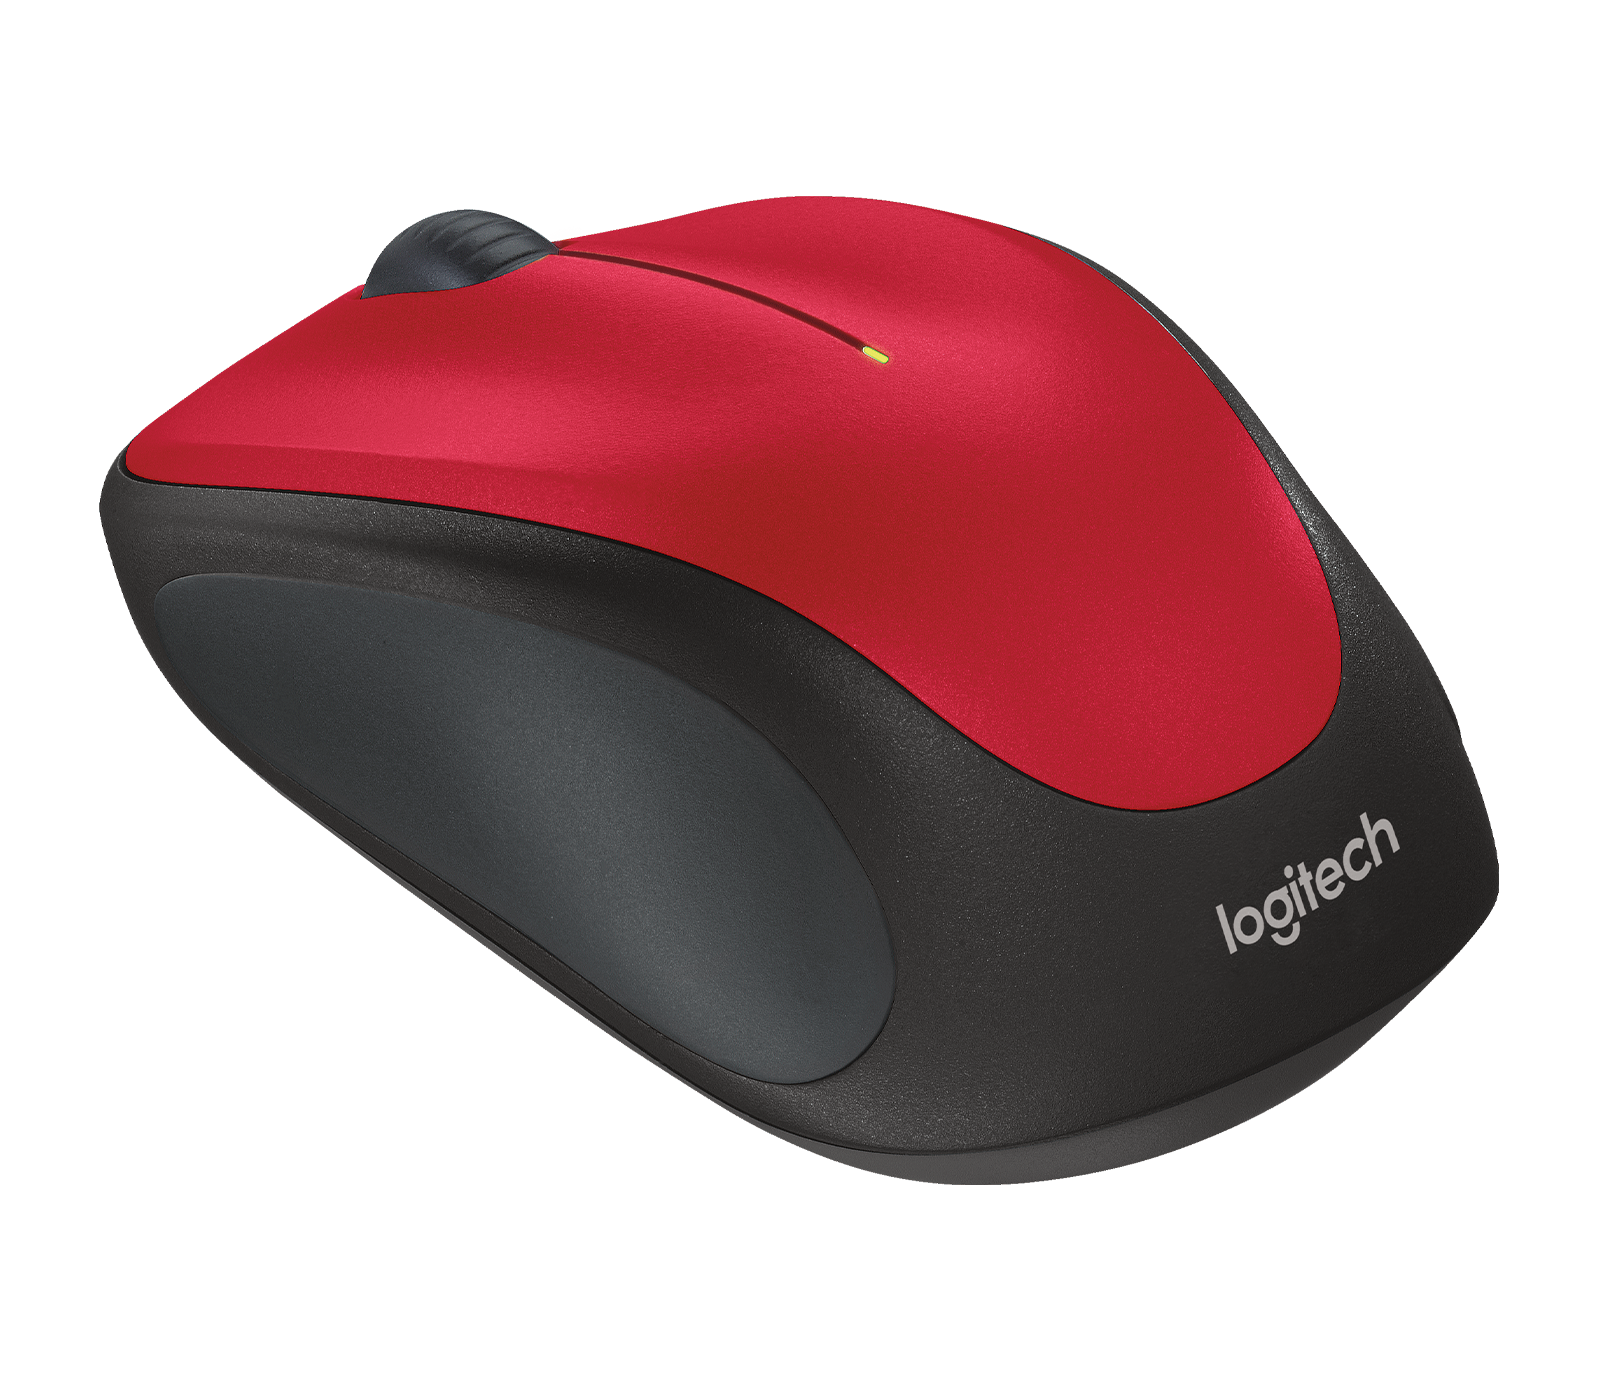 Image of Wireless Mouse M317 Compact with comfortable rubber sides - Red